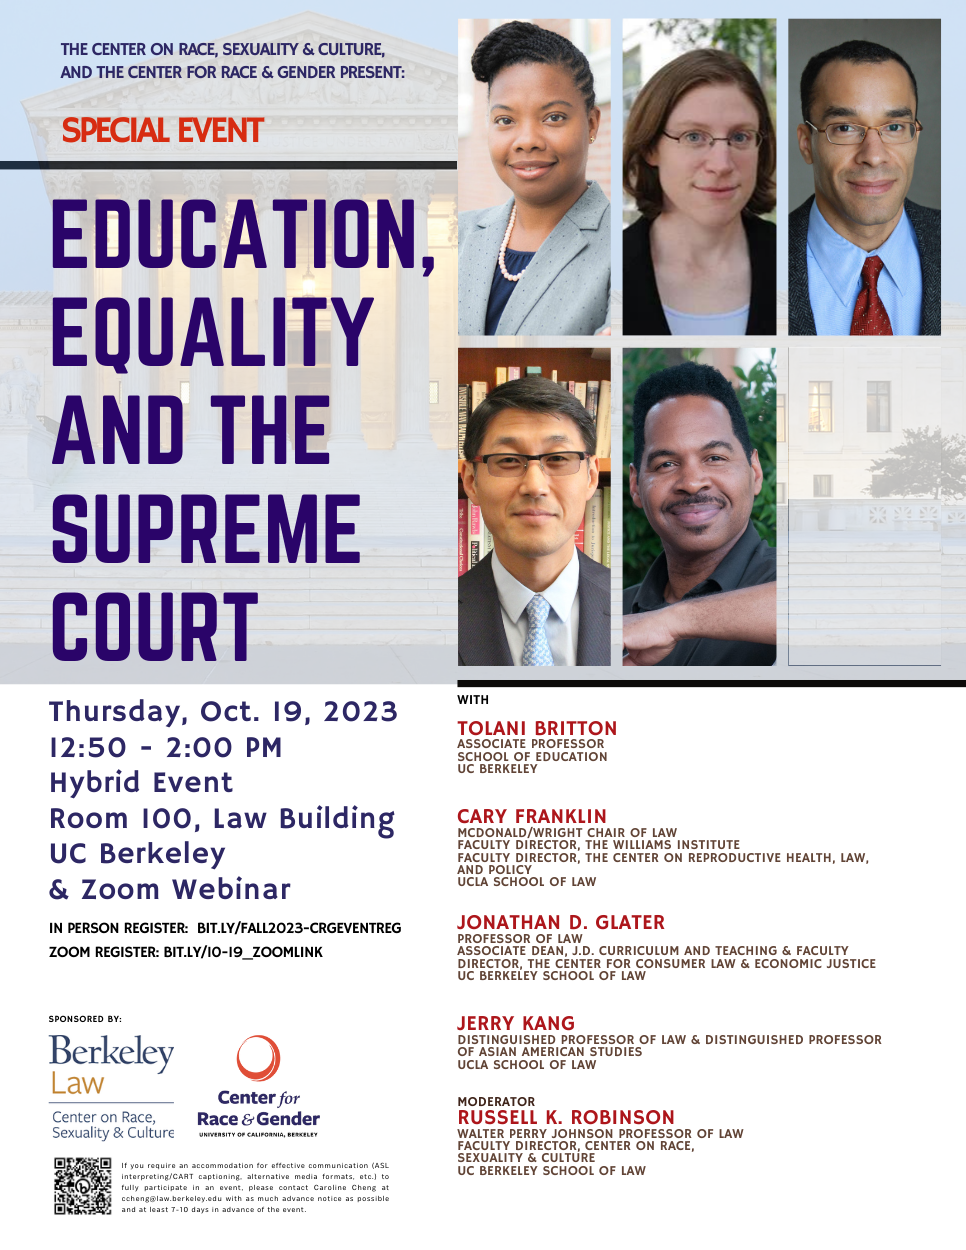 Education, Equality and the Supreme Court Flyer with image of Tolani Britton, Cary Franklin, Jonathan Glater, Jerry Kang and Russell Robinson